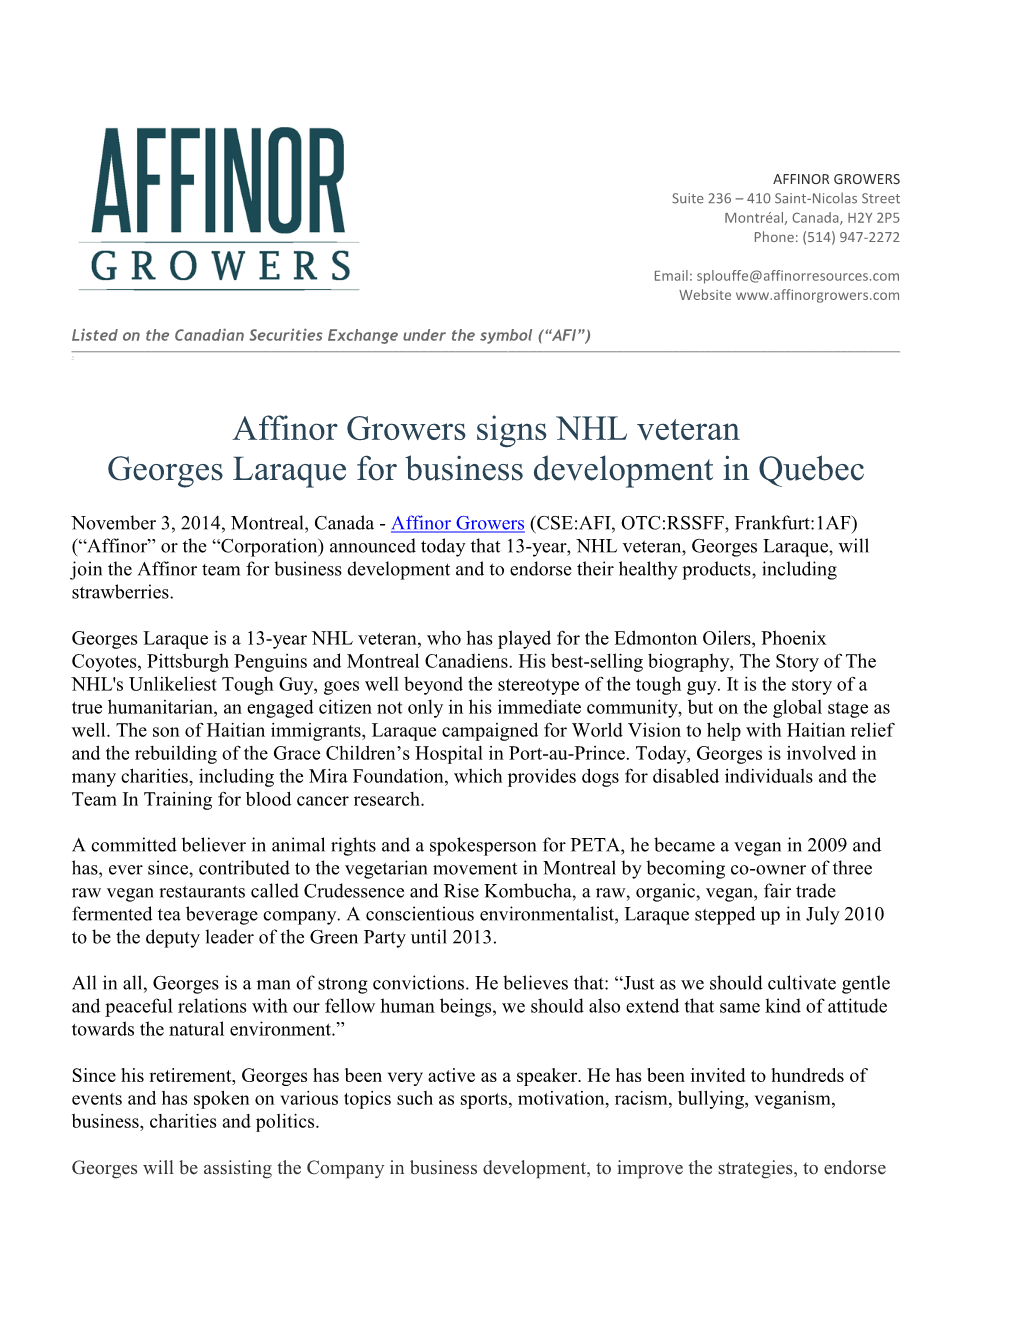 Affinor Growers Signs NHL Veteran Georges Laraque for Business Development in Quebec